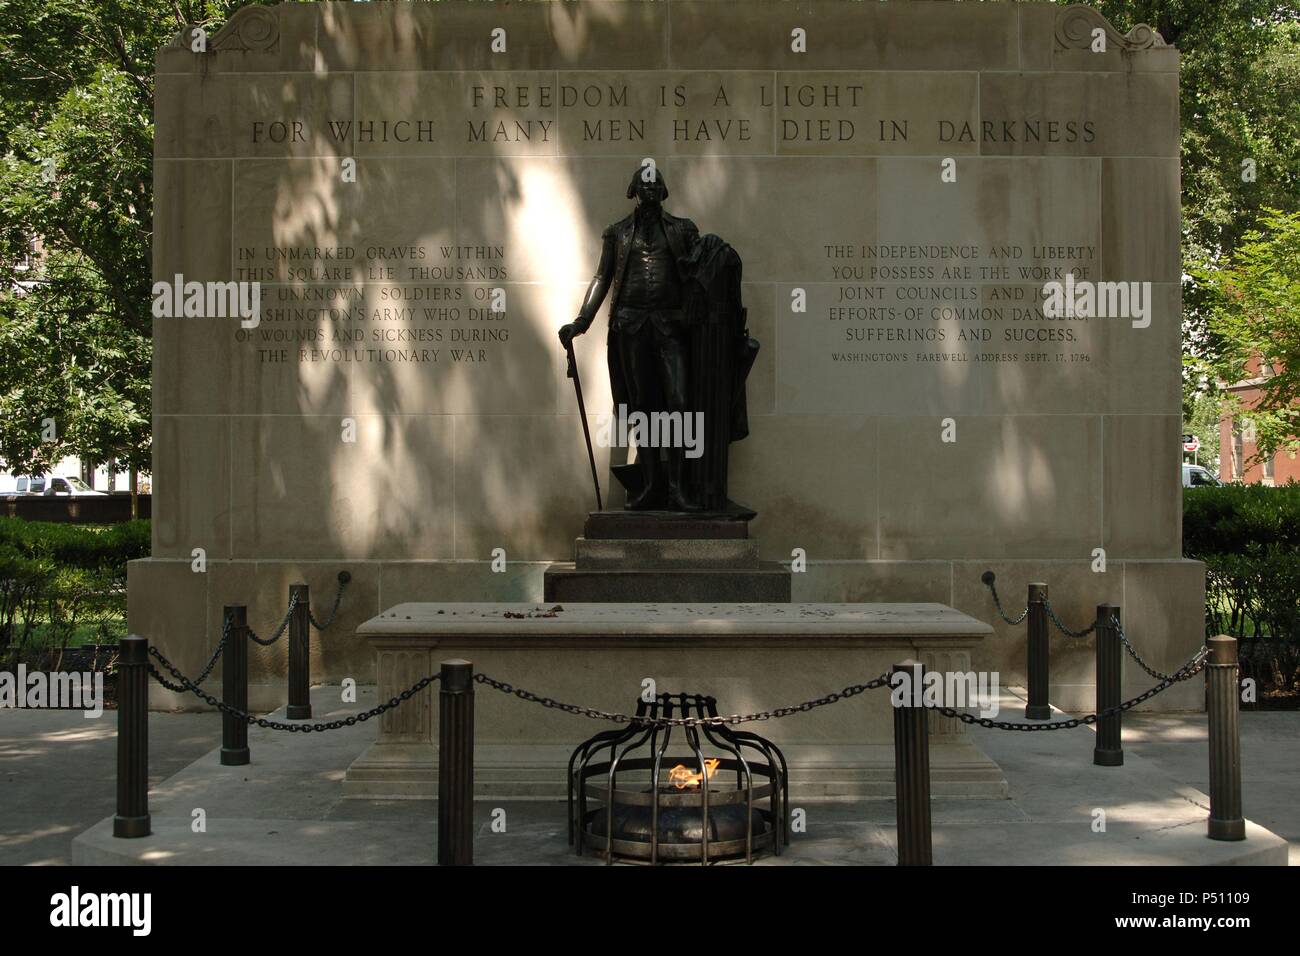 Unites States. Pennsylvania. Philadelphia. Tomb of the Unknown Revolutionary War Soldier, 1957. By G. Edwing Brumbaugh (1890-1983) and statue of George Washington by Jean Antoine Houdon (1741-1828). Stock Photo